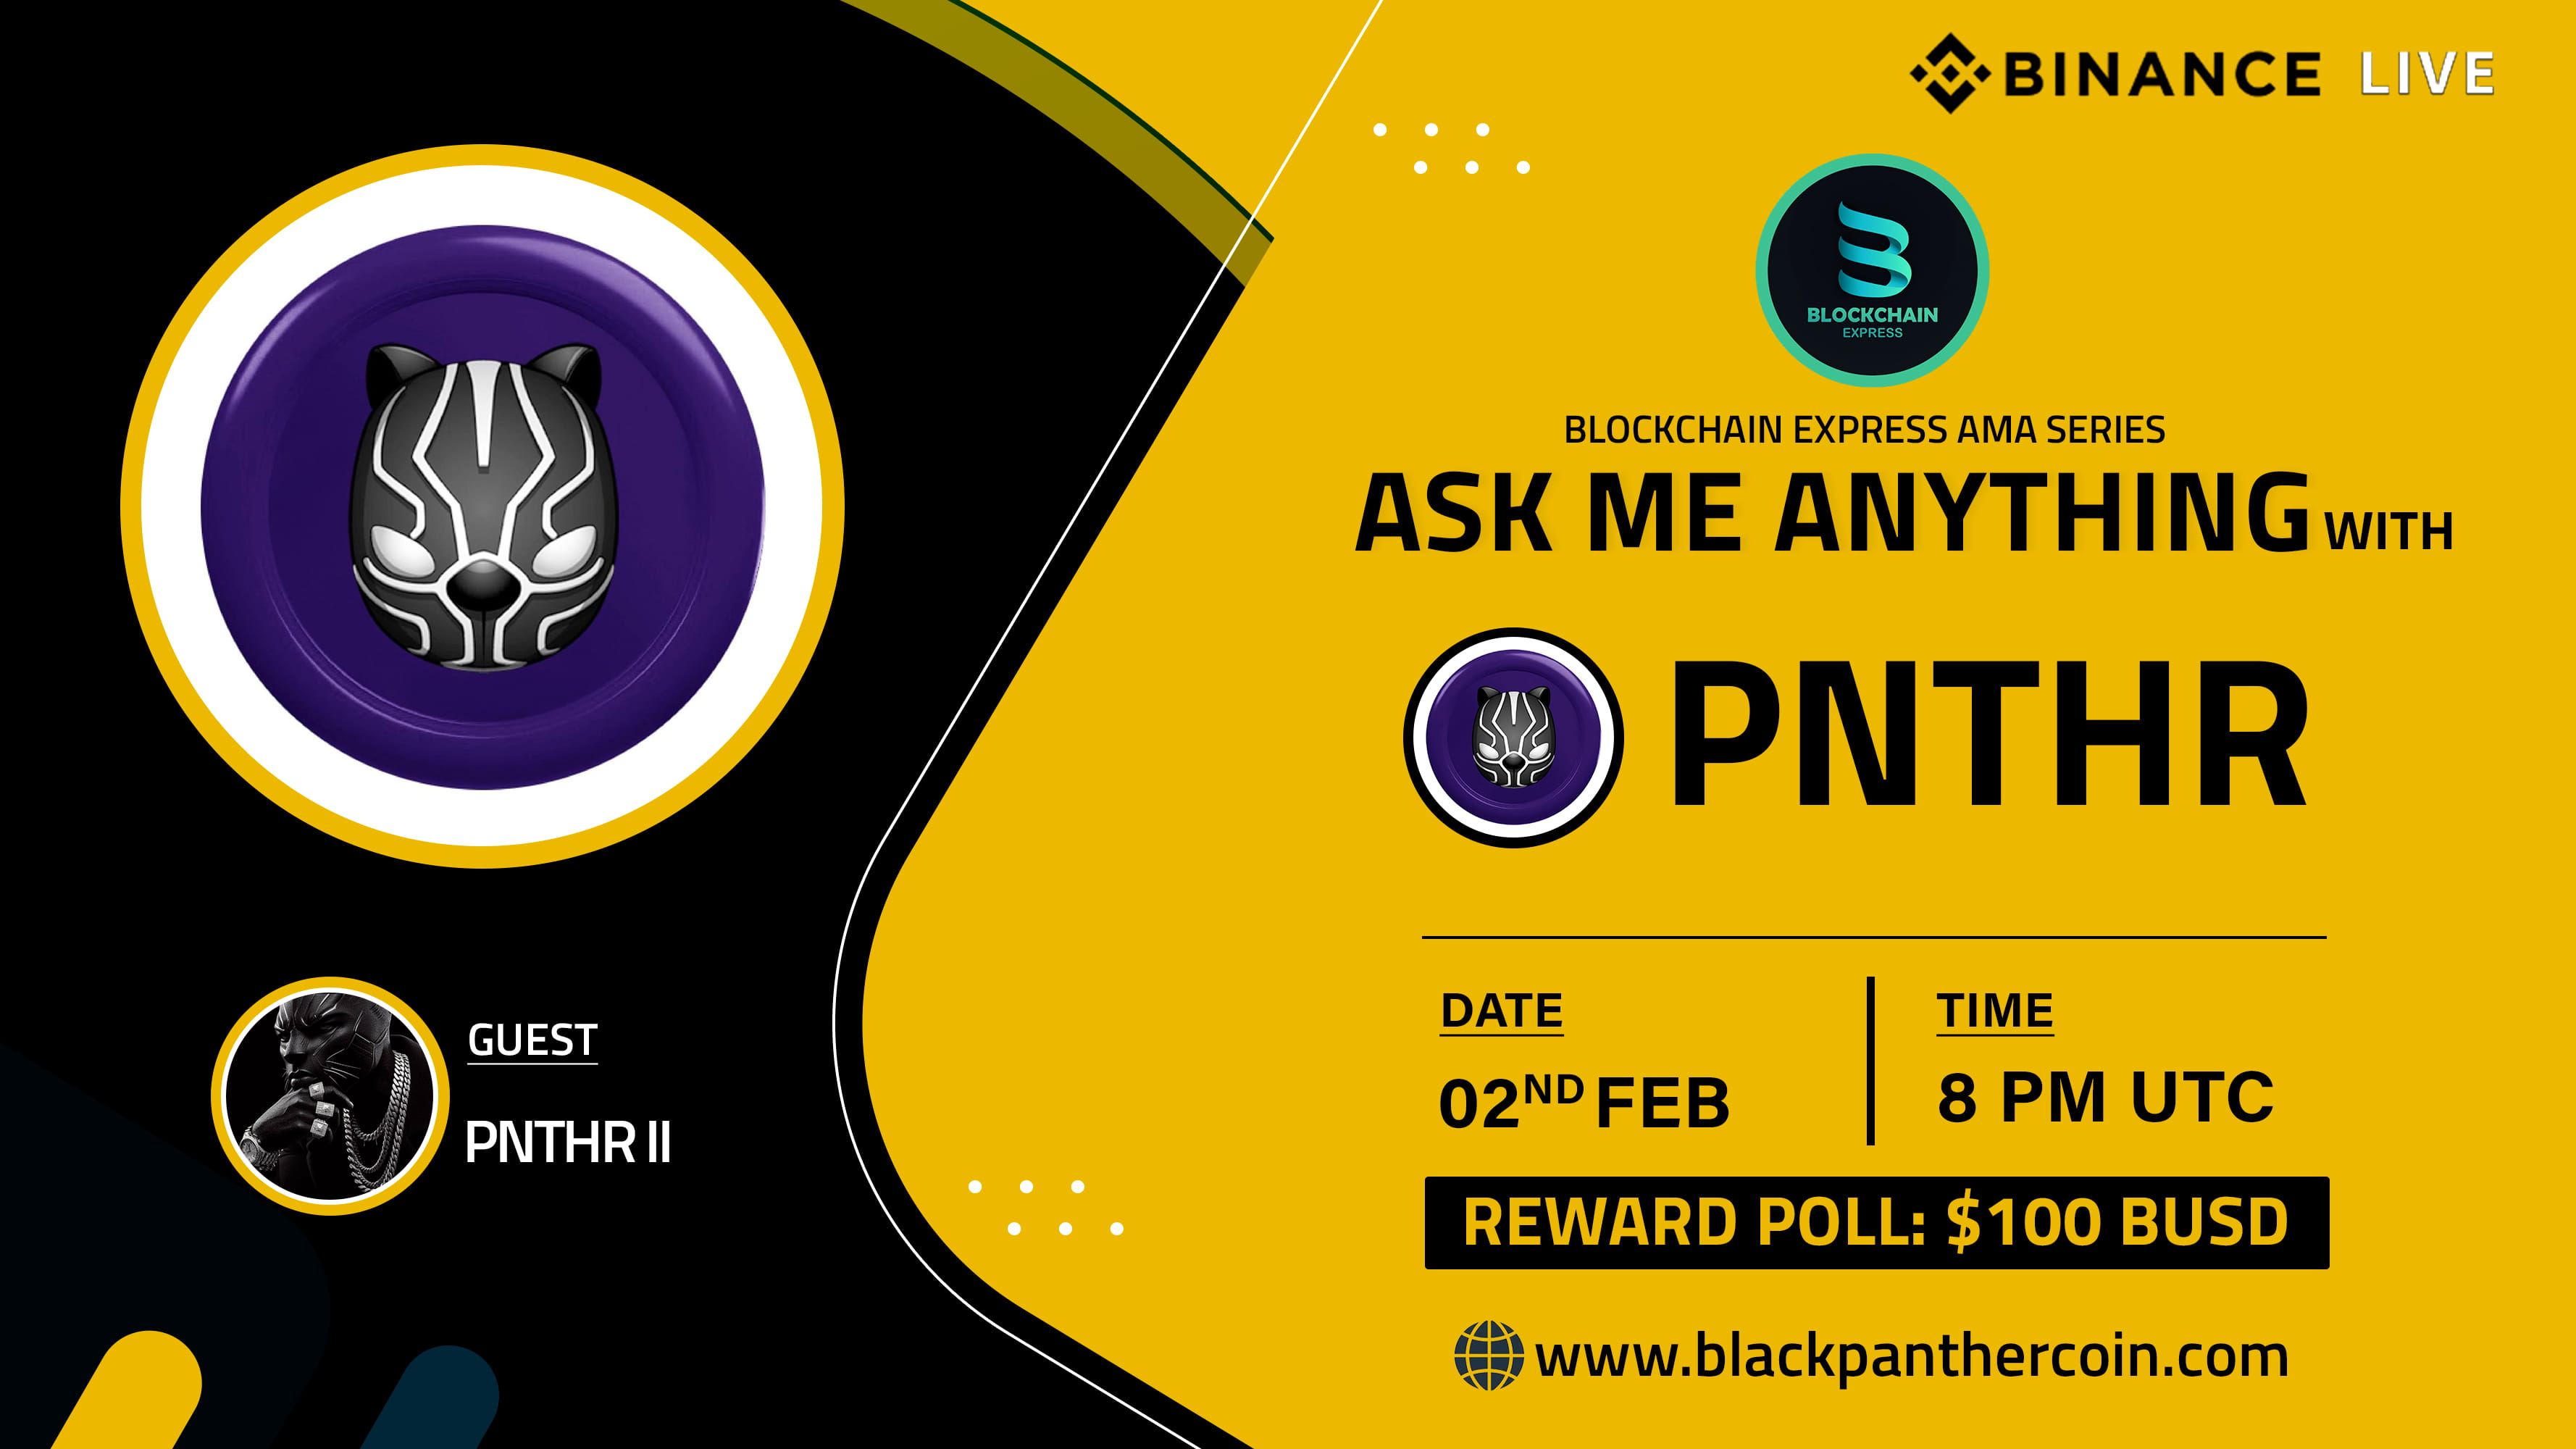 ₿lockchain Express will be hosting an session with" PNTHR "